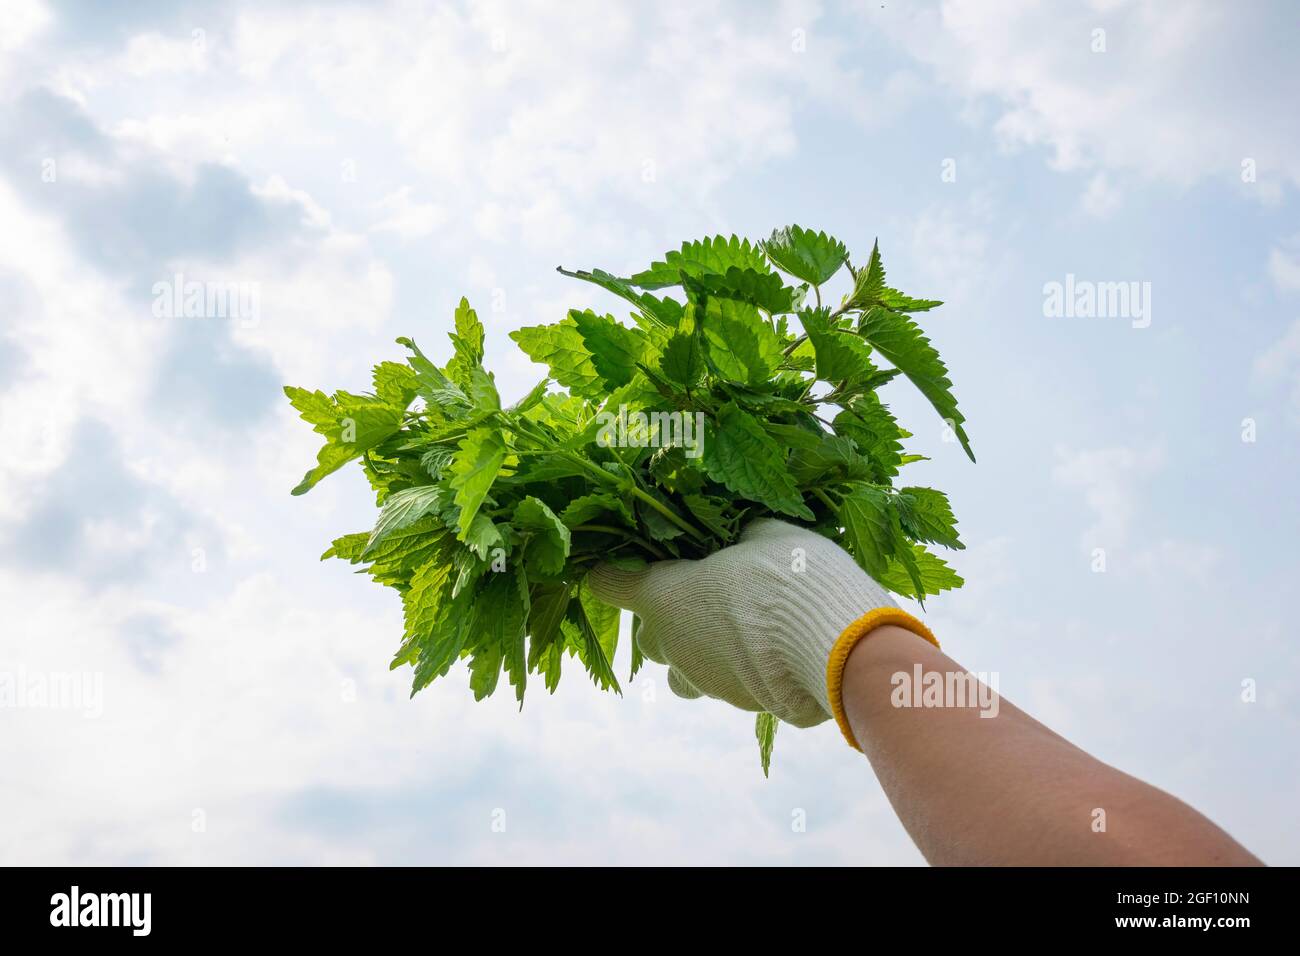 Bunch of fresh harvested nettle plant leaves in woman hand over sky background. Healthy food, superfood, herb for health and beauty, skin care Stock Photo